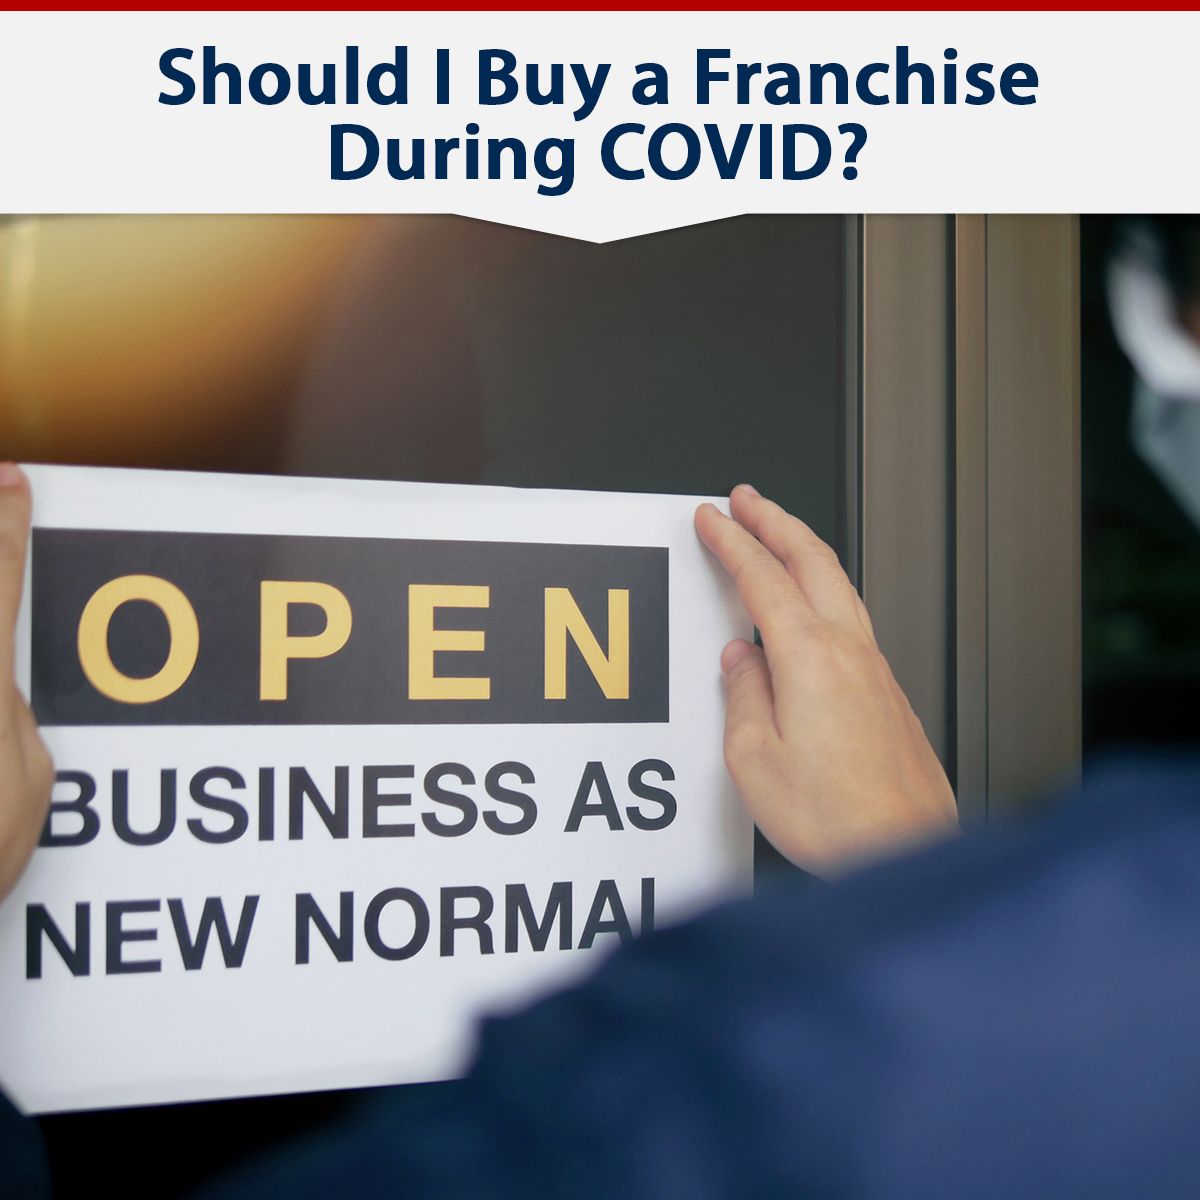 Should I Buy a Franchise During COVID?